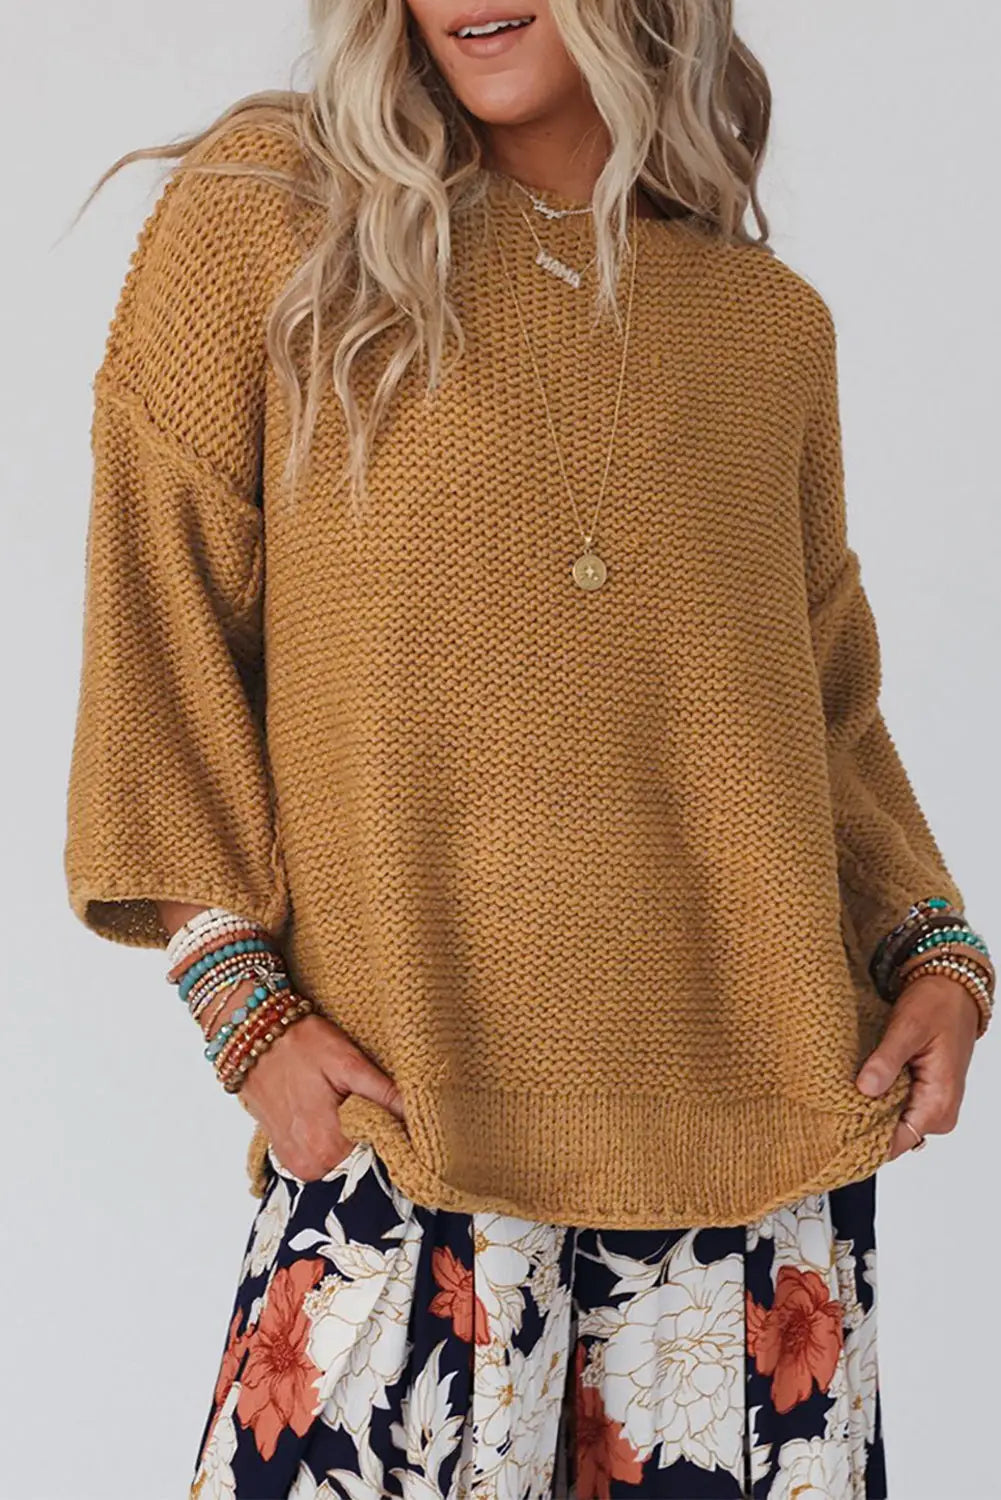 Brown slouchy textured knit loose sweater - s / 60% cotton + 40% acrylic - sweaters & cardigans